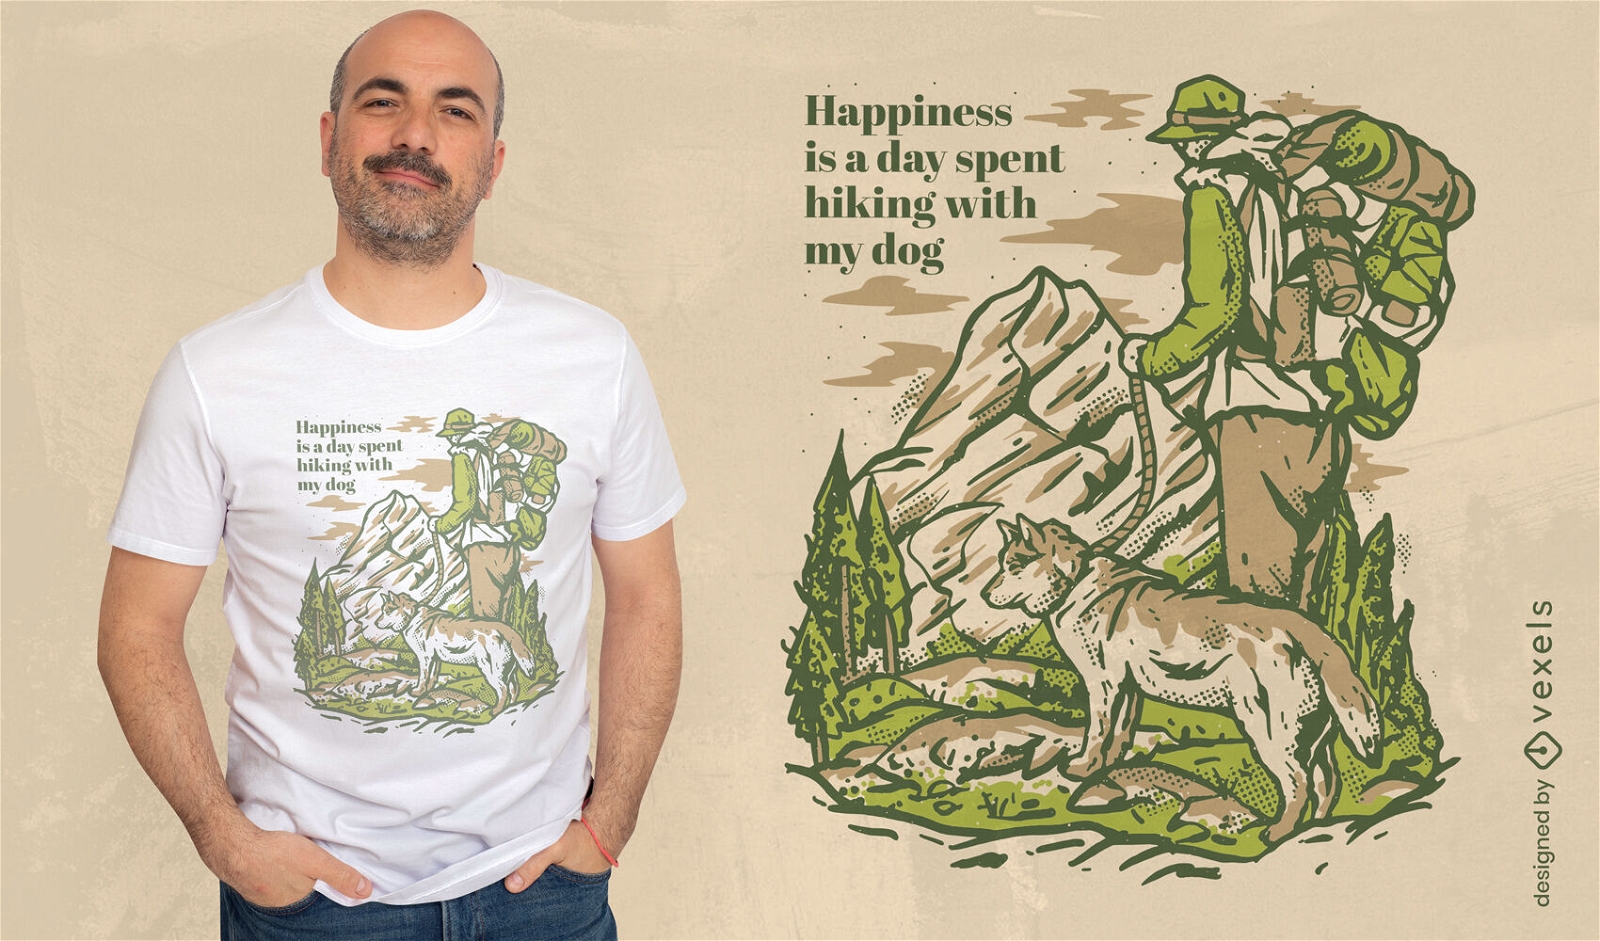 Hiking happiness and dogs t-shirt design